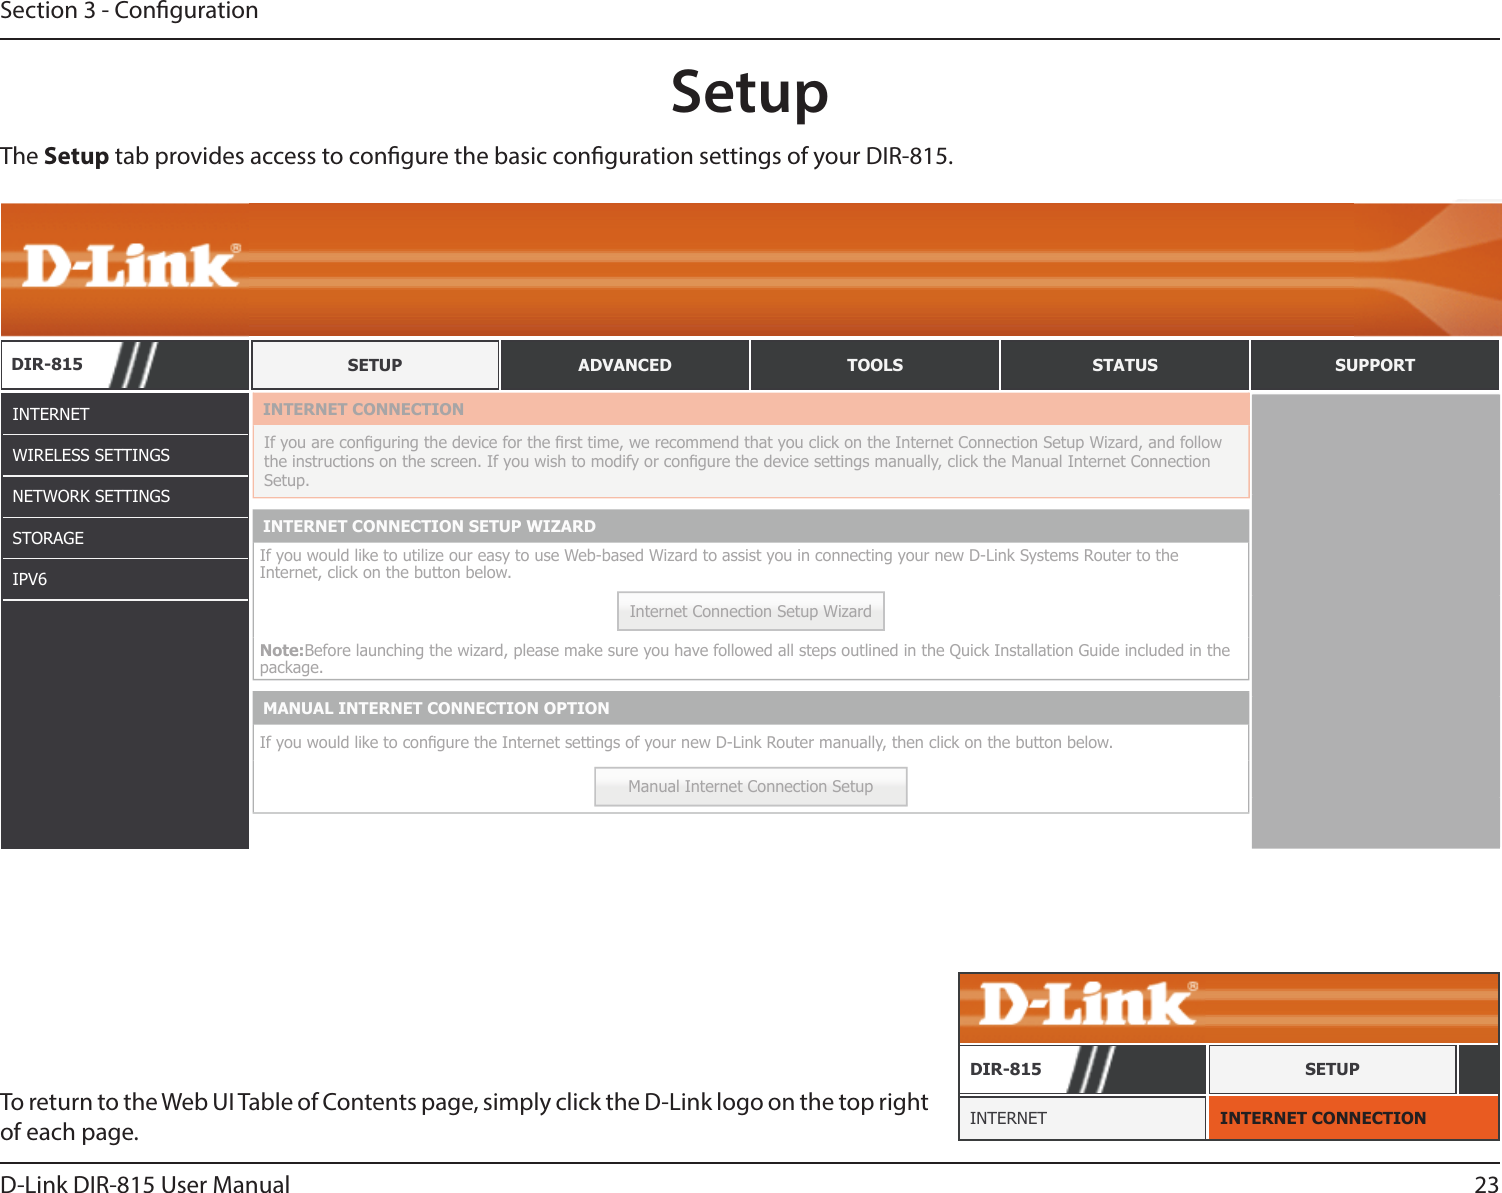 23D-Link DIR-815 User ManualSection 3 - CongurationSetupINTERNETWIRELESS SETTINGSNETWORK SETTINGSSTORAGEIPV6The Setup tab provides access to congure the basic conguration settings of your DIR-815.To return to the Web UI Table of Contents page, simply click the D-Link logo on the top right of each page. INTERNET CONNECTIONINTERNETDIR-815 SETUPDIR-815 SETUP ADVANCED TOOLS STATUS SUPPORTINTERNET CONNECTIONIf you are conguring the device for the rst time, we recommend that you click on the Internet Connection Setup Wizard, and follow the instructions on the screen. If you wish to modify or congure the device settings manually, click the Manual Internet Connection Setup.INTERNET CONNECTION SETUP WIZARDIf you would like to utilize our easy to use Web-based Wizard to assist you in connecting your new D-Link Systems Router to the Internet, click on the button below.Internet Connection Setup WizardNote:Before launching the wizard, please make sure you have followed all steps outlined in the Quick Installation Guide included in the package.MANUAL INTERNET CONNECTION OPTIONIf you would like to congure the Internet settings of your new D-Link Router manually, then click on the button below.Manual Internet Connection Setup